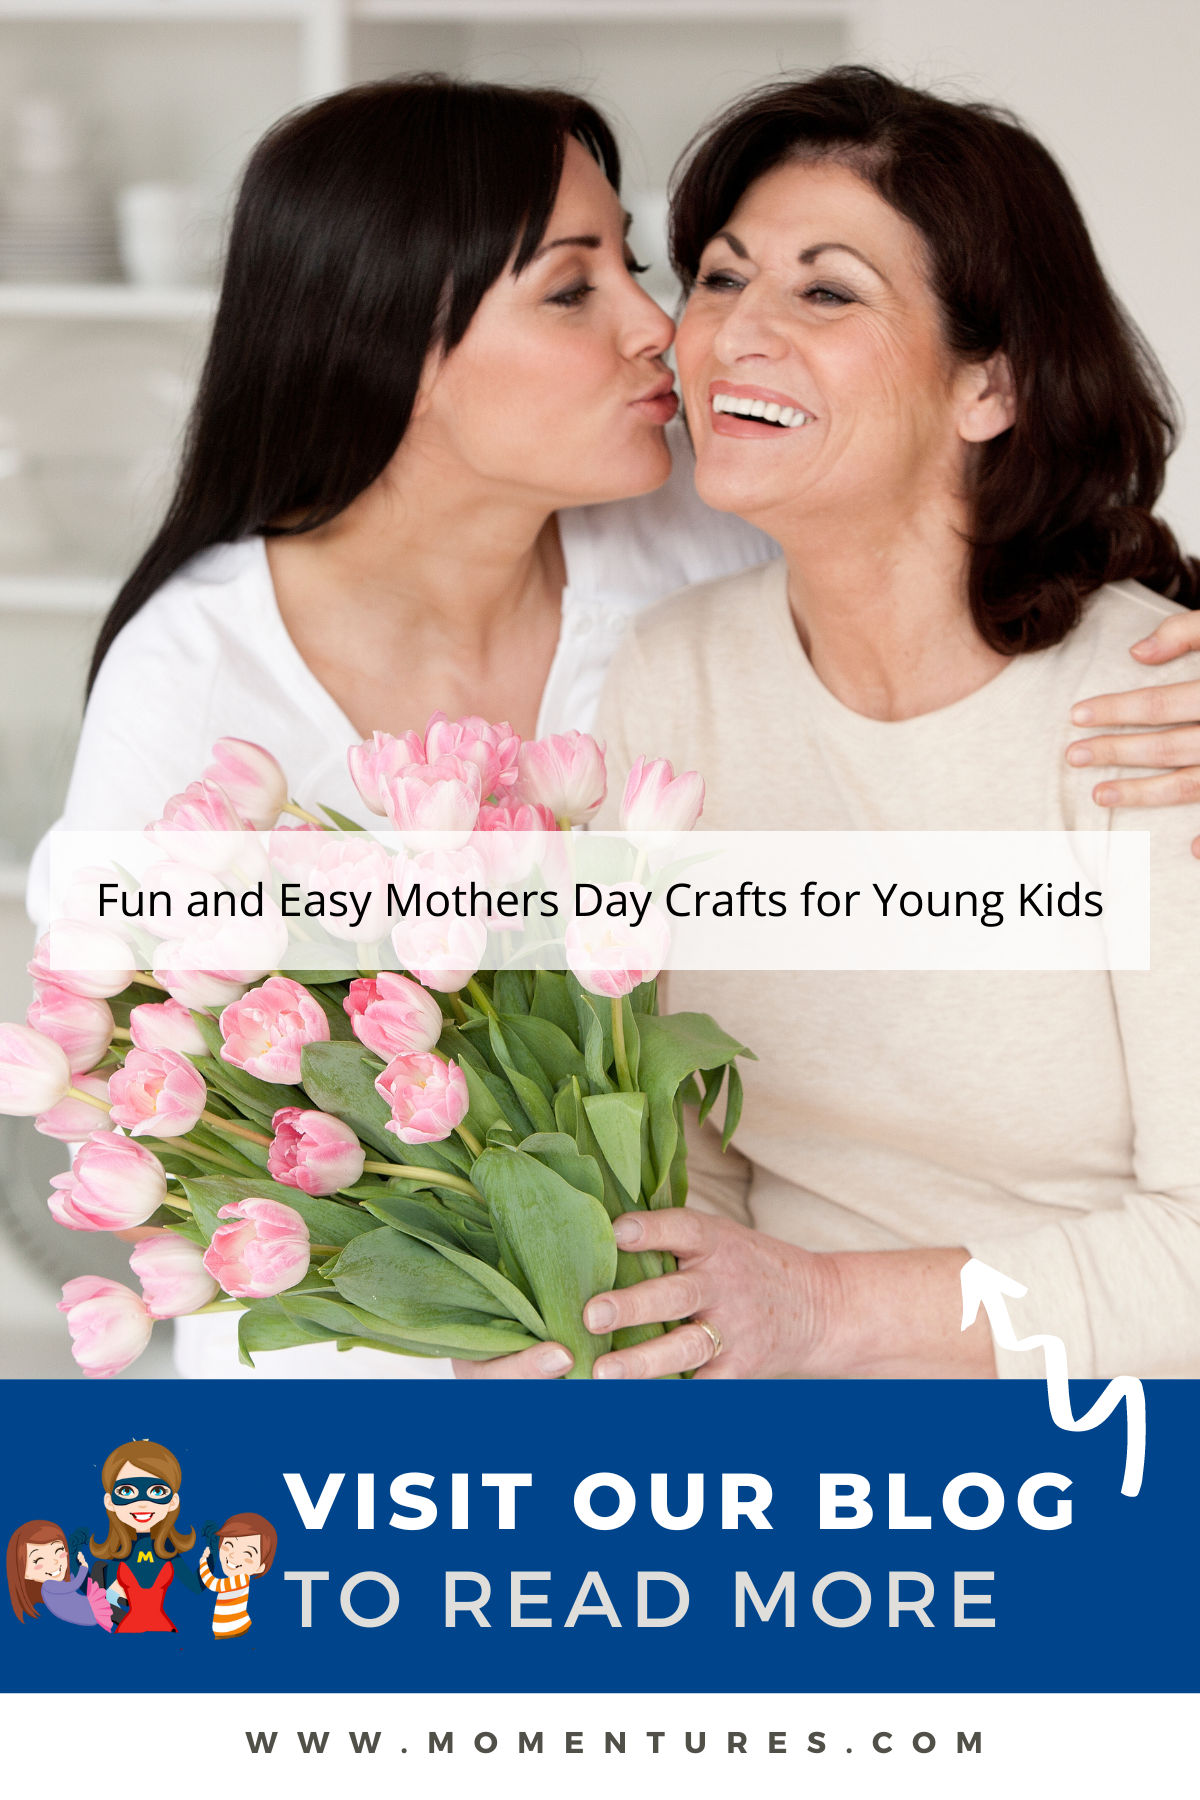 Fun and Easy Mothers Day Crafts for Young Kids